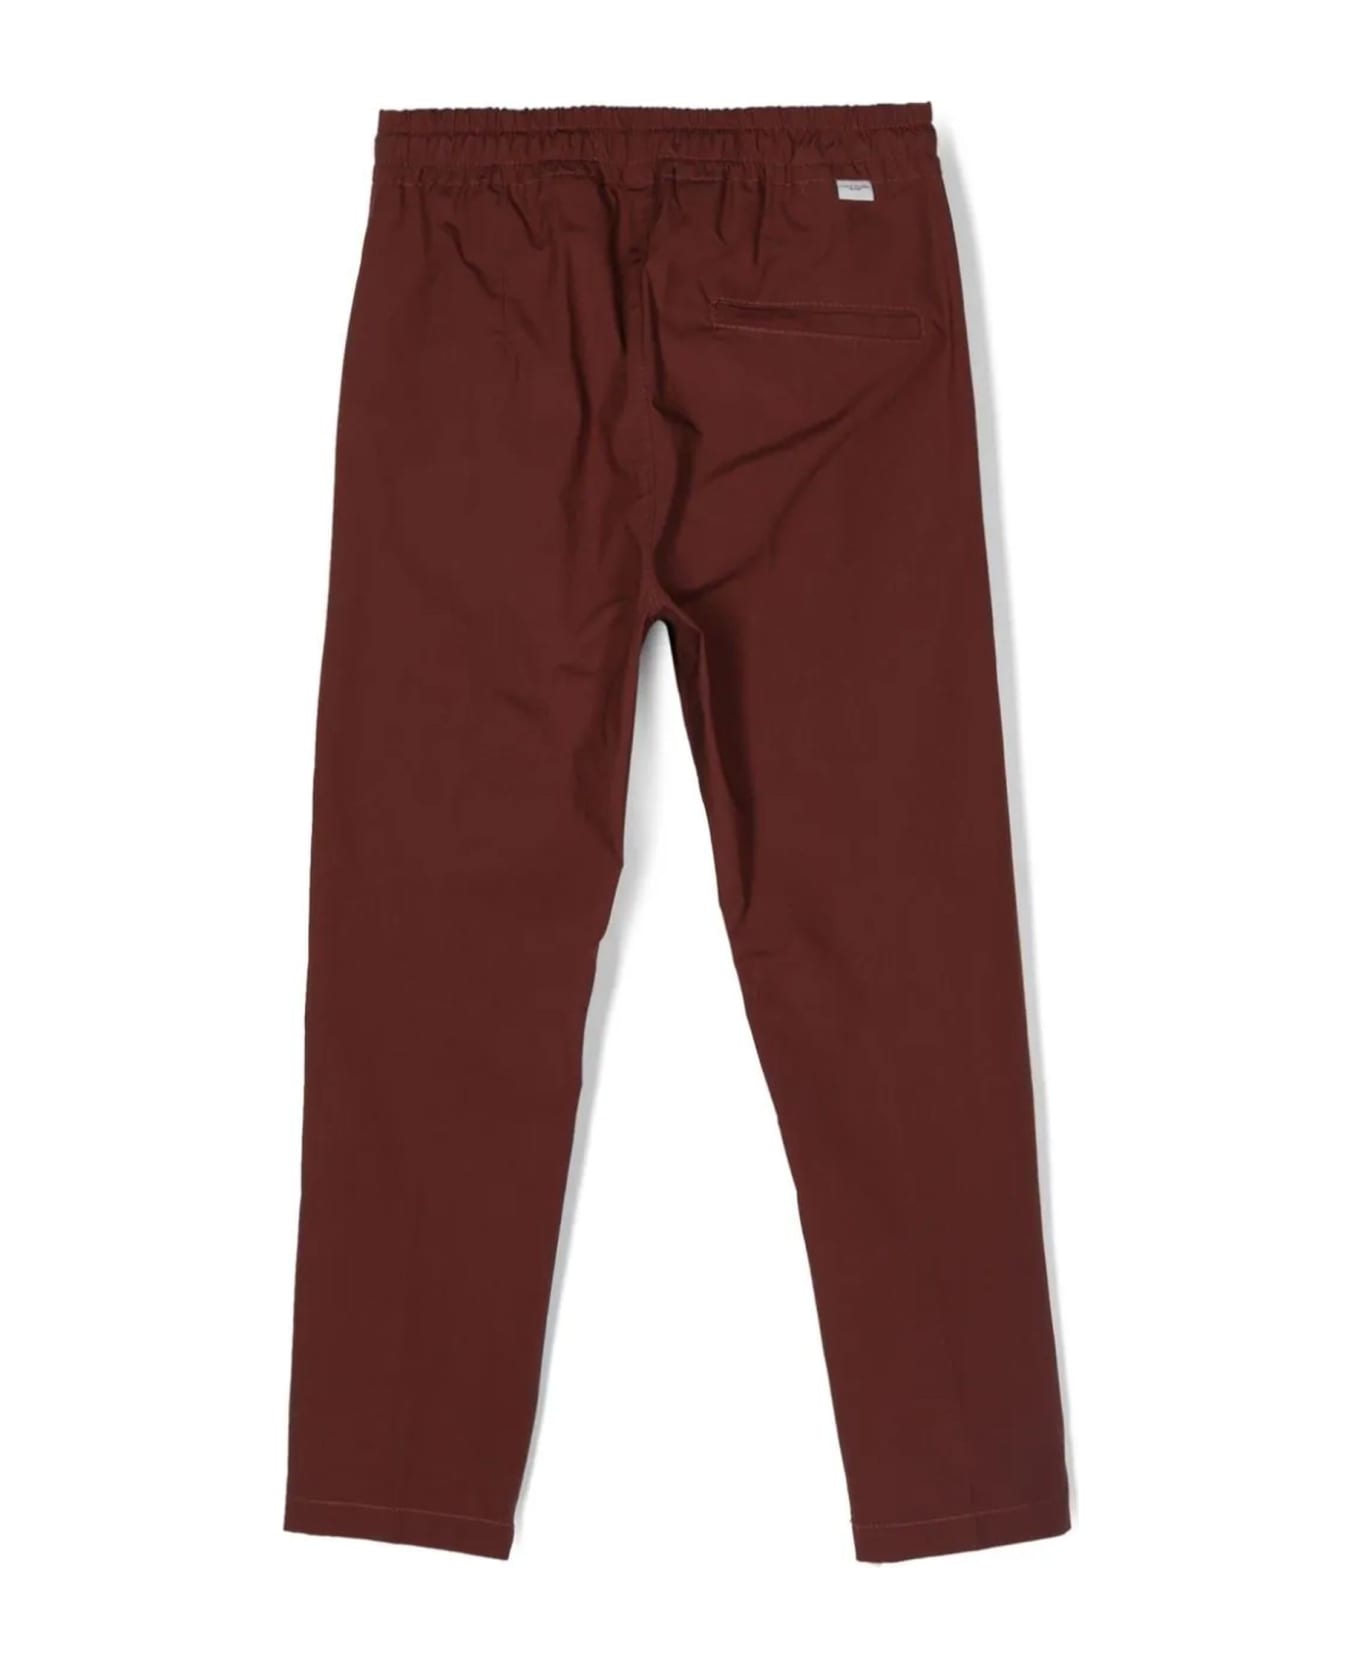 Paolo Pecora Trousers Red - Red ボトムス